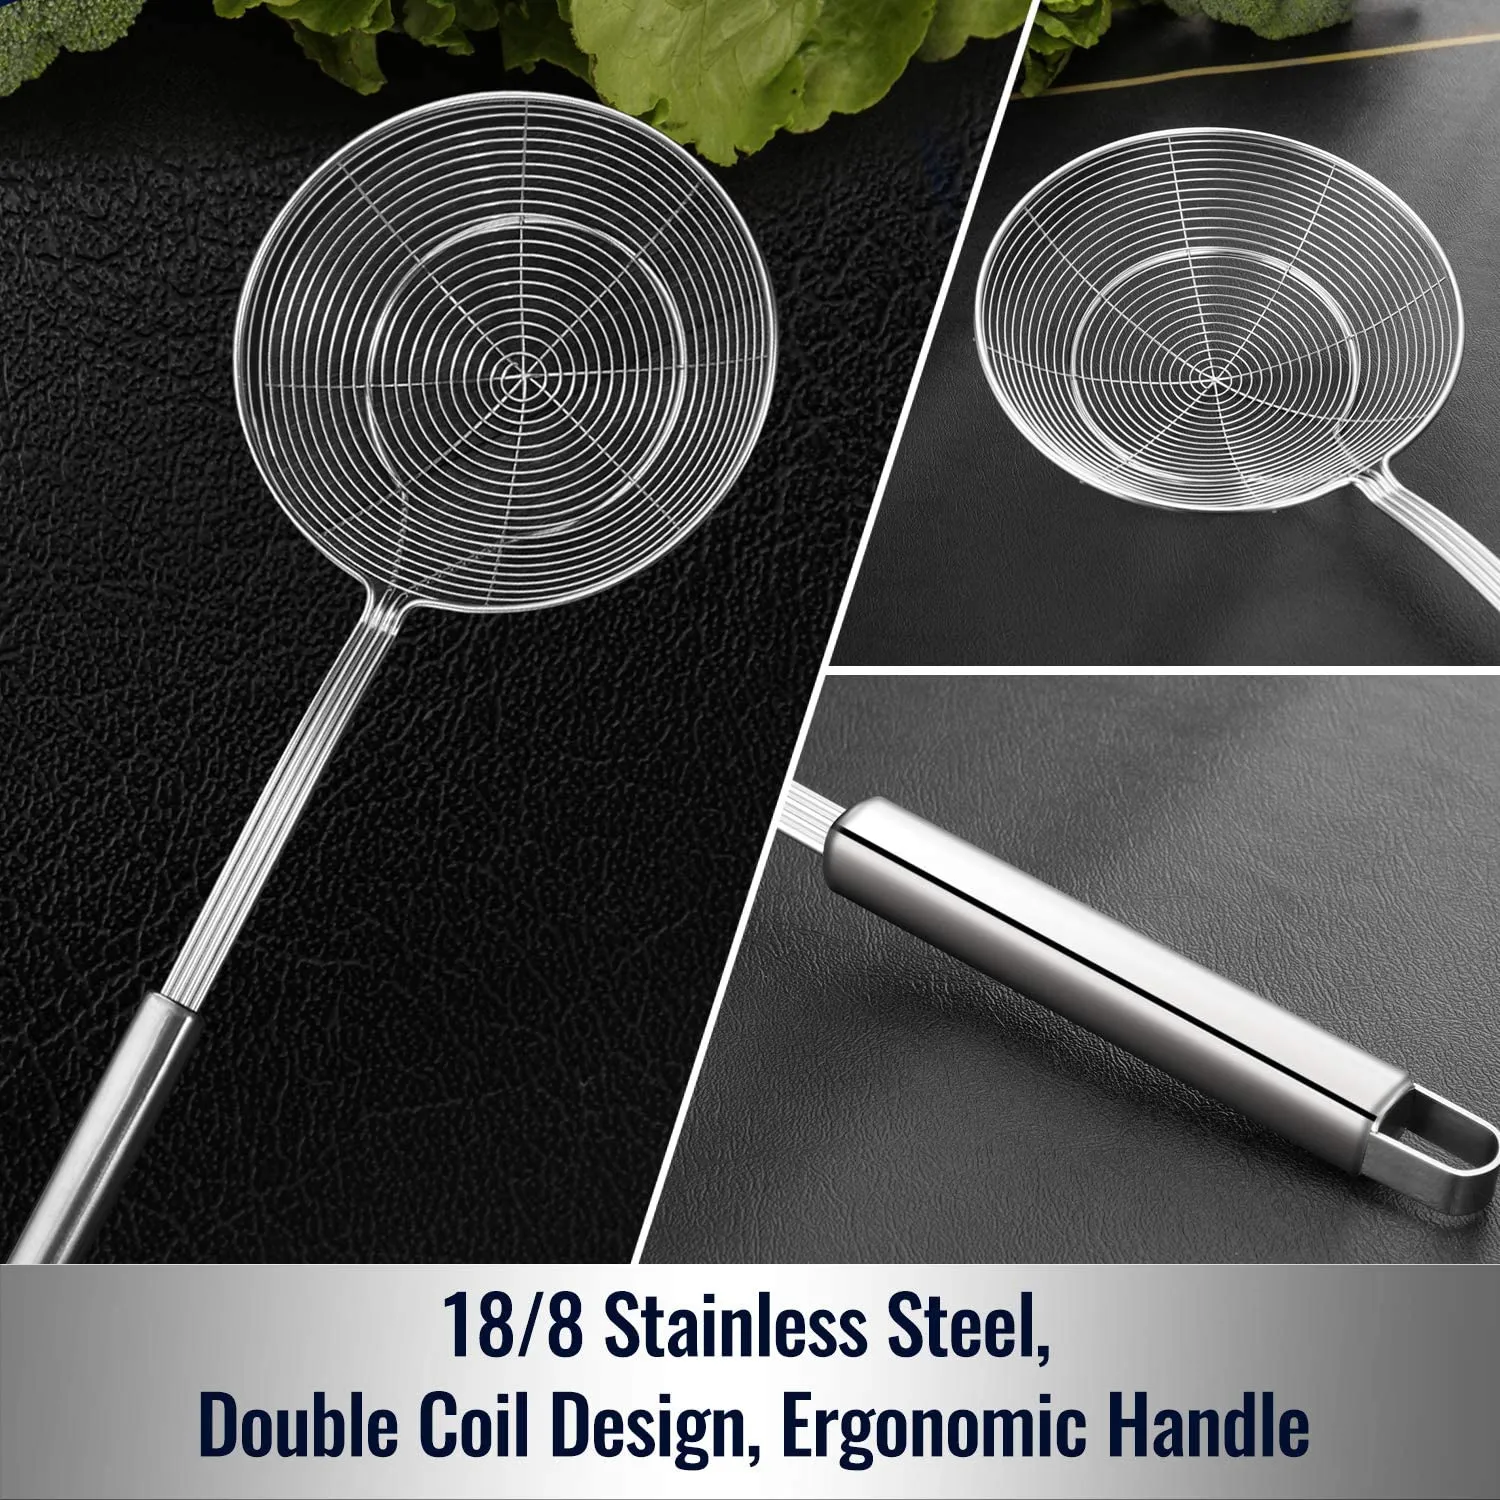 NEW Solid Stainless Steel Spider Strainer Skimmer Ladle for Cooking and Frying Kitchen Utensils Wire Pasta Strainer Spoon